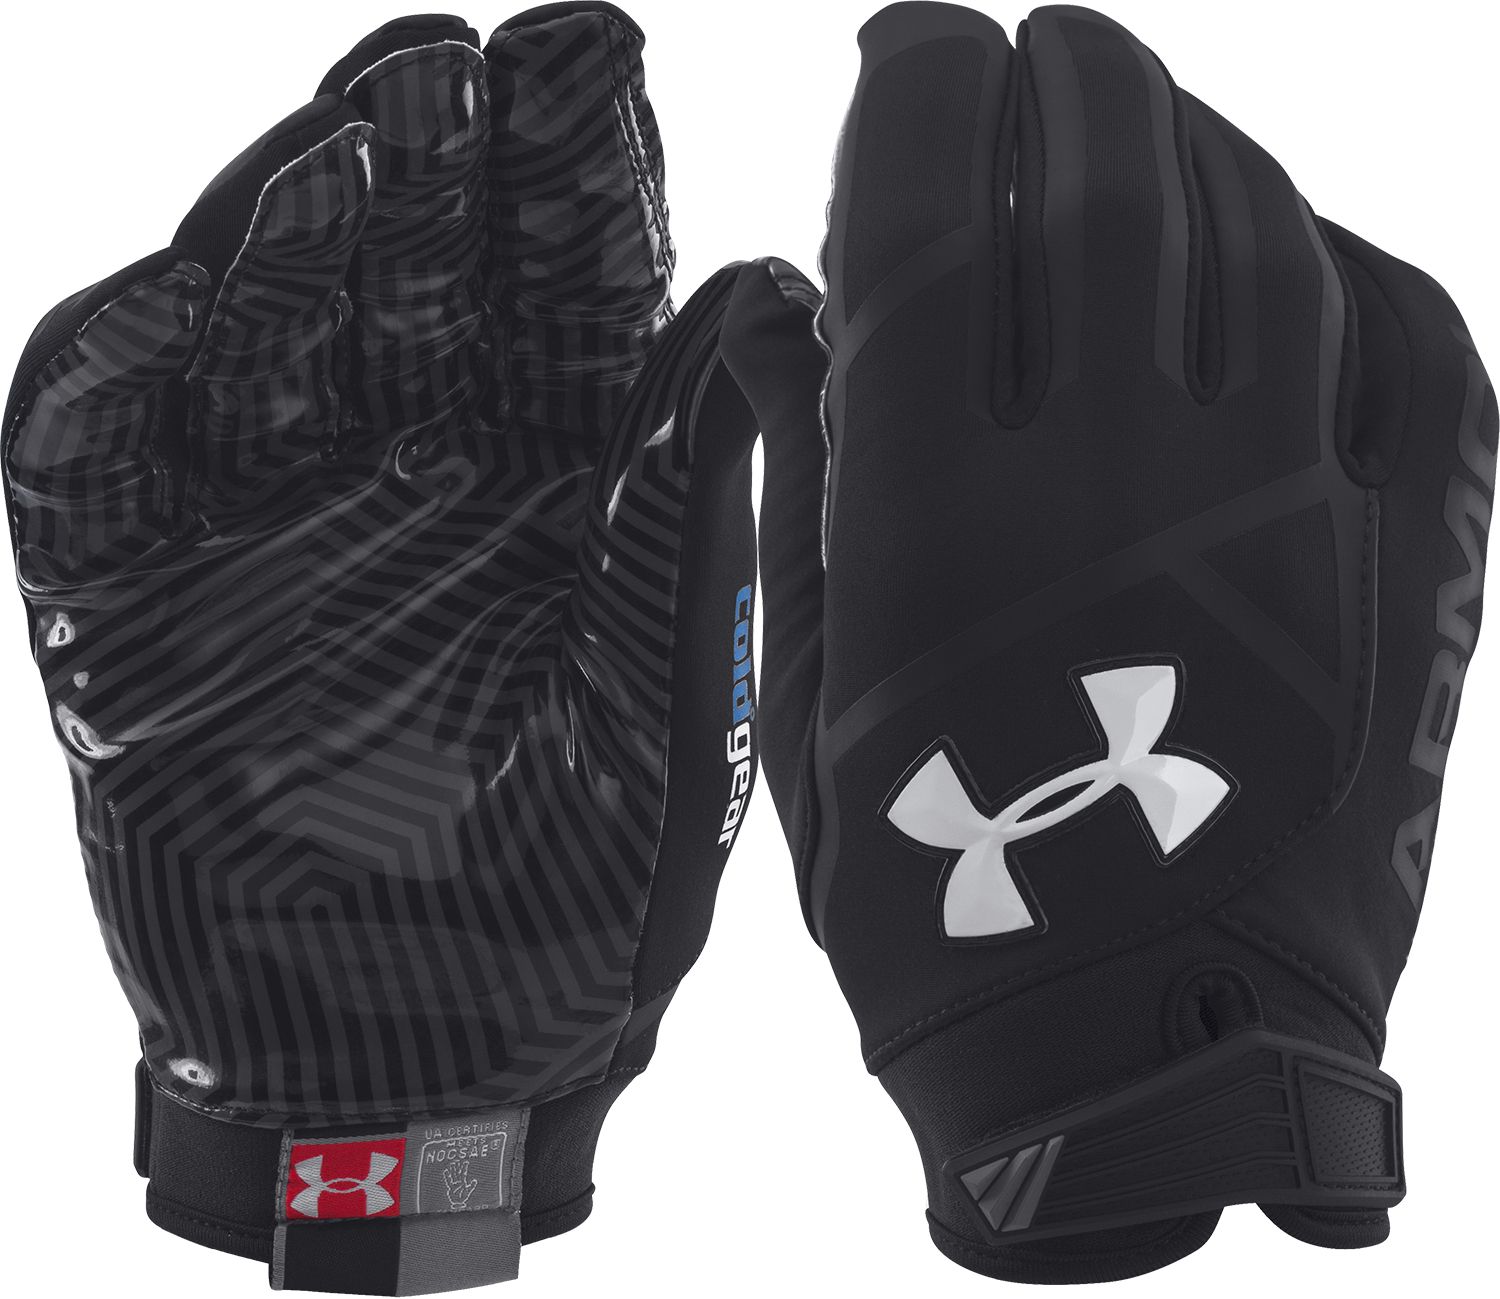 Under Armour Adult Playoff ColdGear Football Gloves | DICK'S Sporting Goods